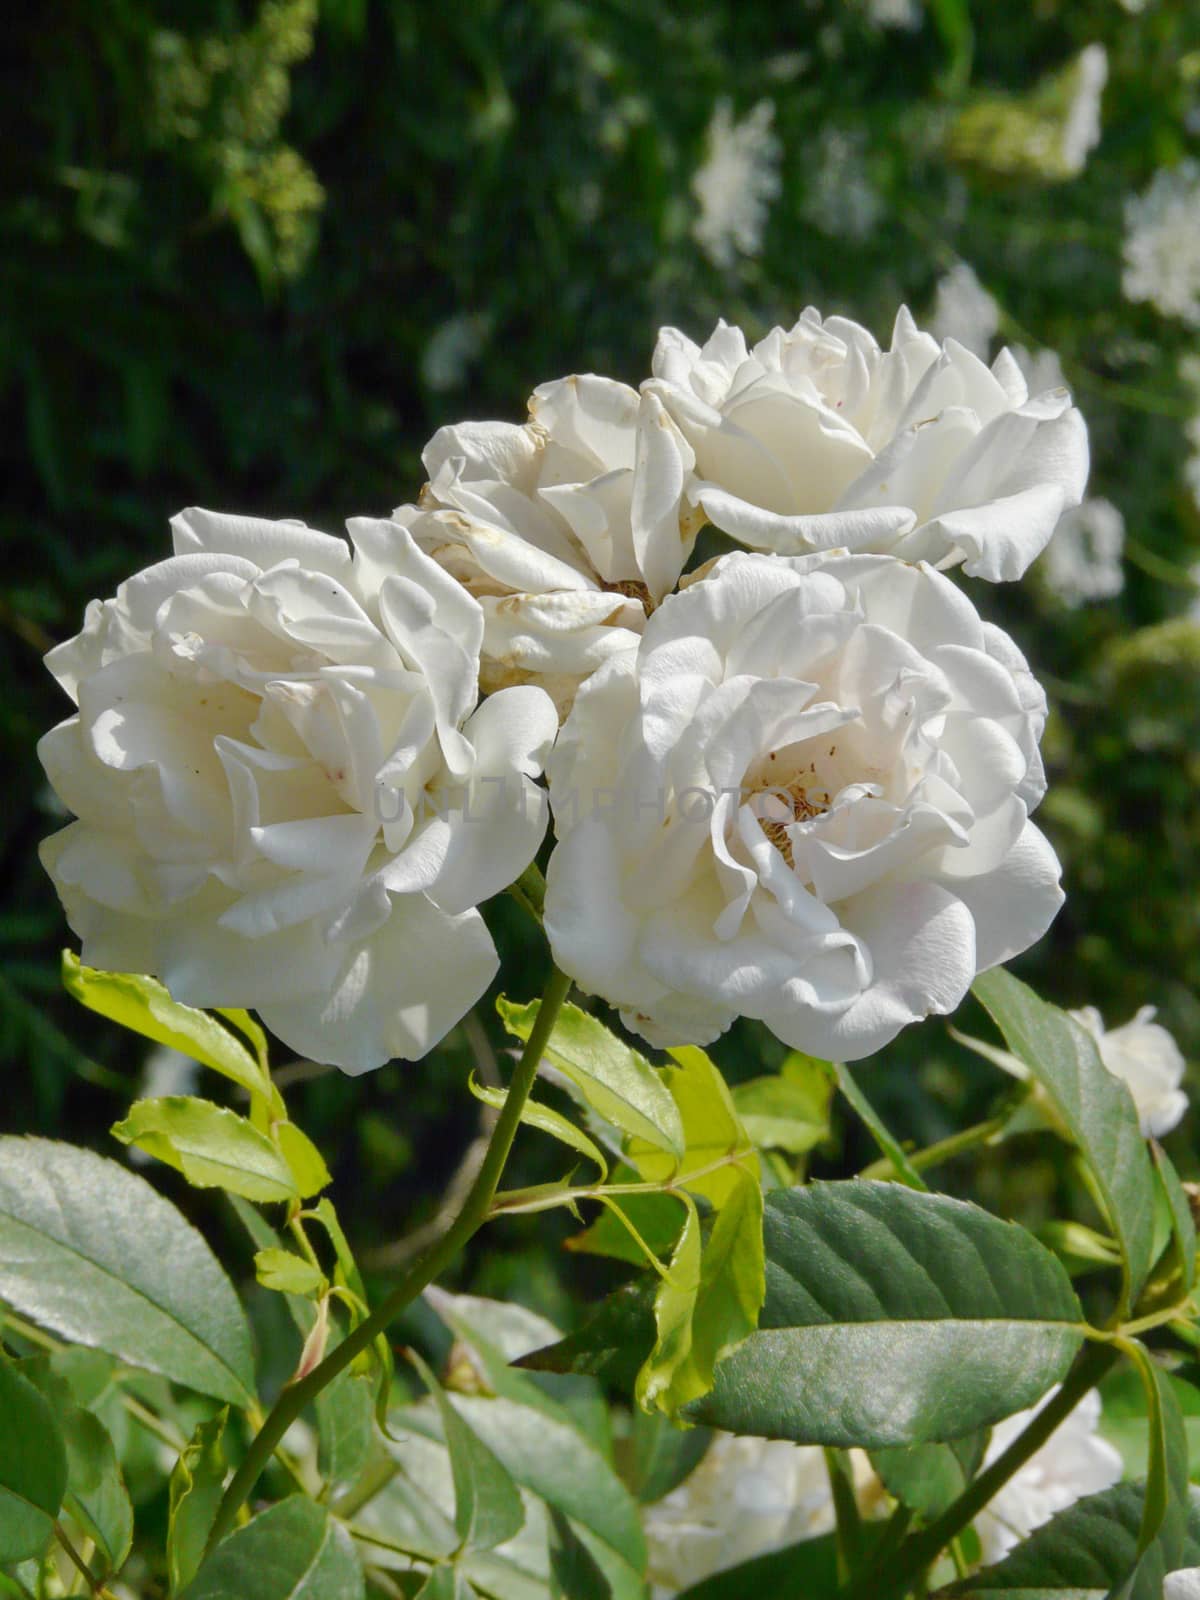 white luxurious roses with a delicate smell will be an ornament  by Adamchuk